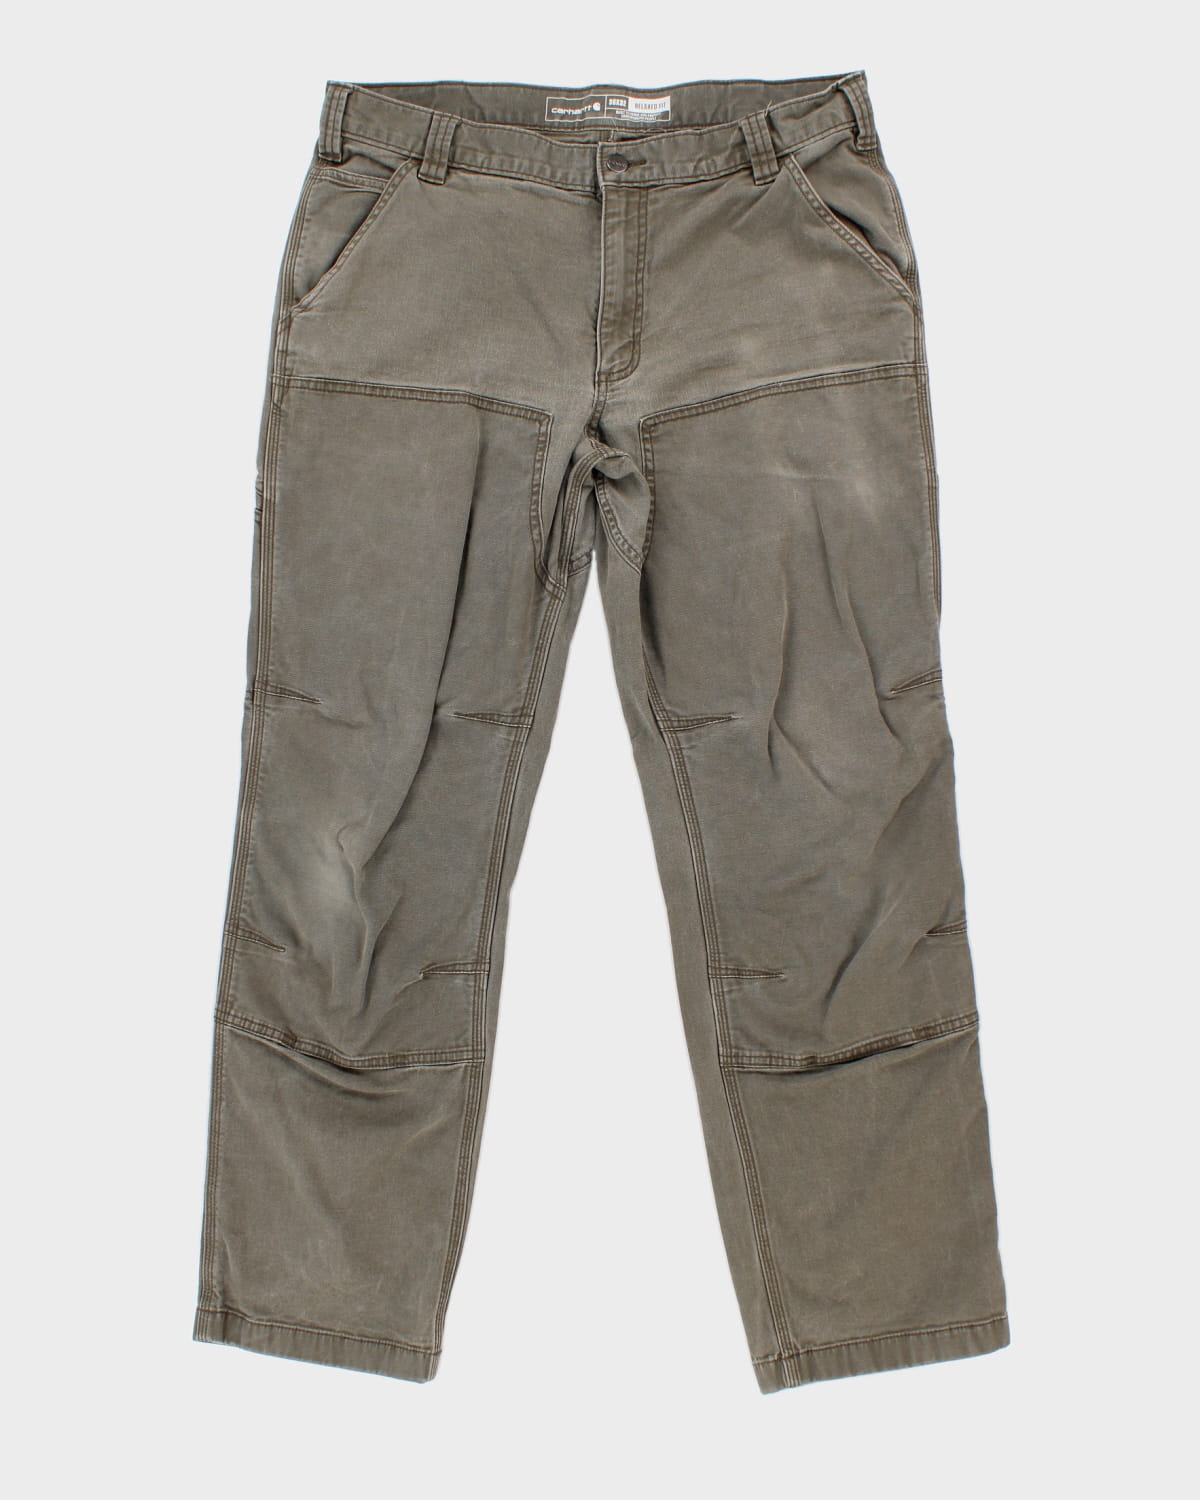 Carhartt Relaxed Fit Double Knee Trousers - W36 L32